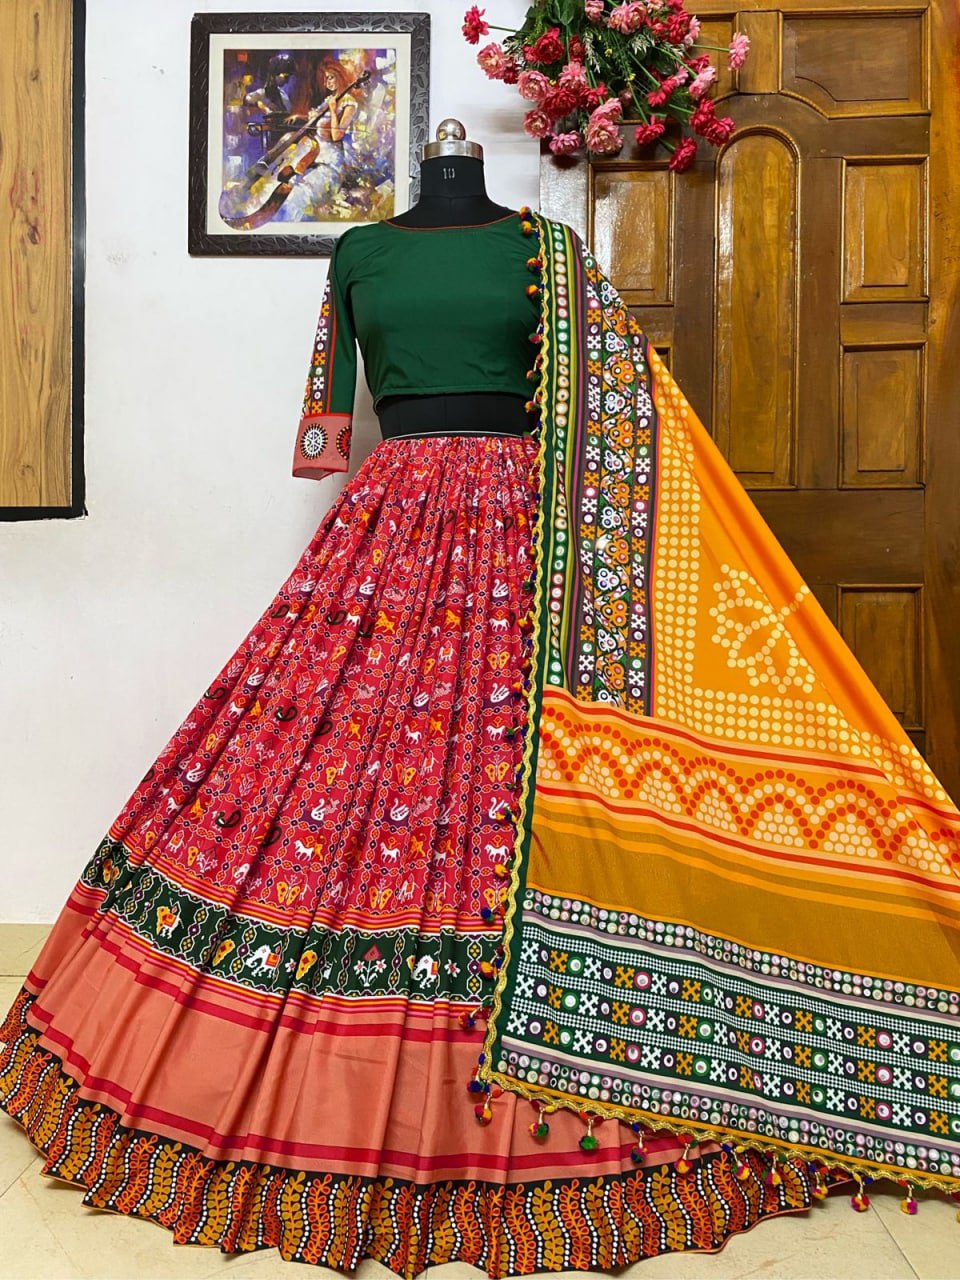 Ivorydesignstudio - Stunning Pochampally Ikat pure silk skirt & blouse  fabric set ( unstitched). Adult size. Please WhatsApp 9003183002 to order.  Delivery time about a week. #ivory_handlooms #ivorydesigns  #ivorydesignstudio #ikat #handloom #pochampally #